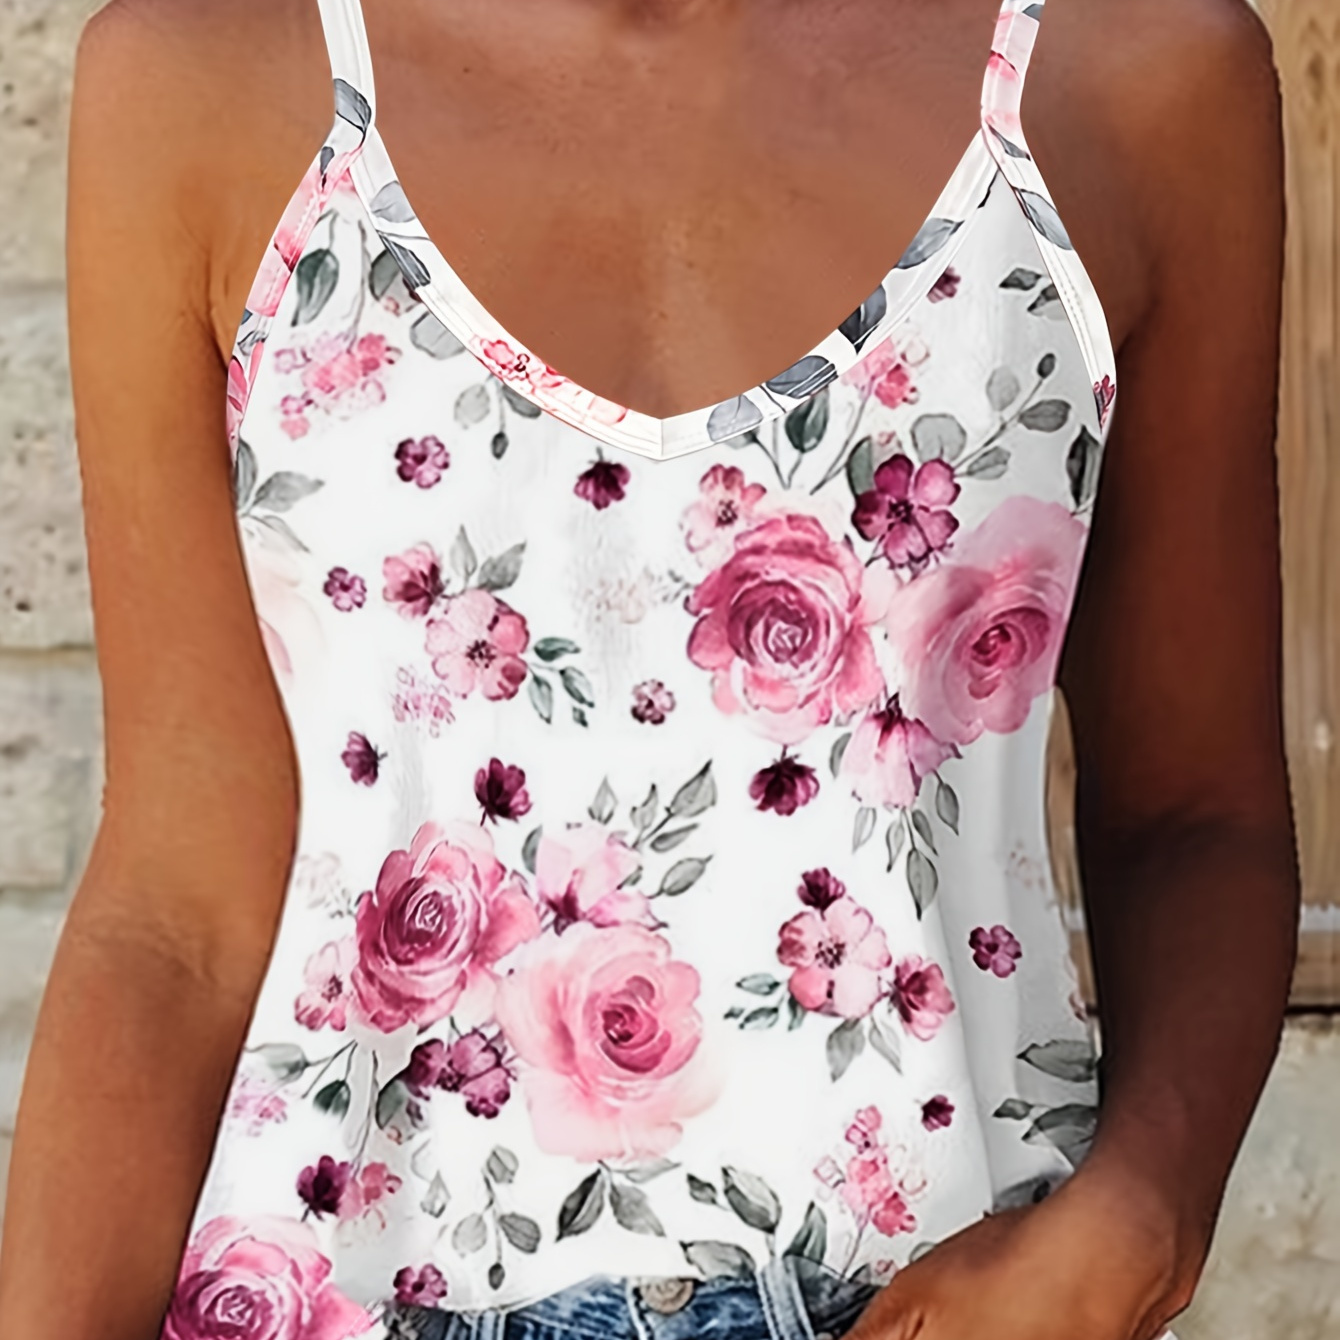 

Floral Print V Neck Strap Top, Casual Sleeveless Cami Top For Summer, Women's Clothing